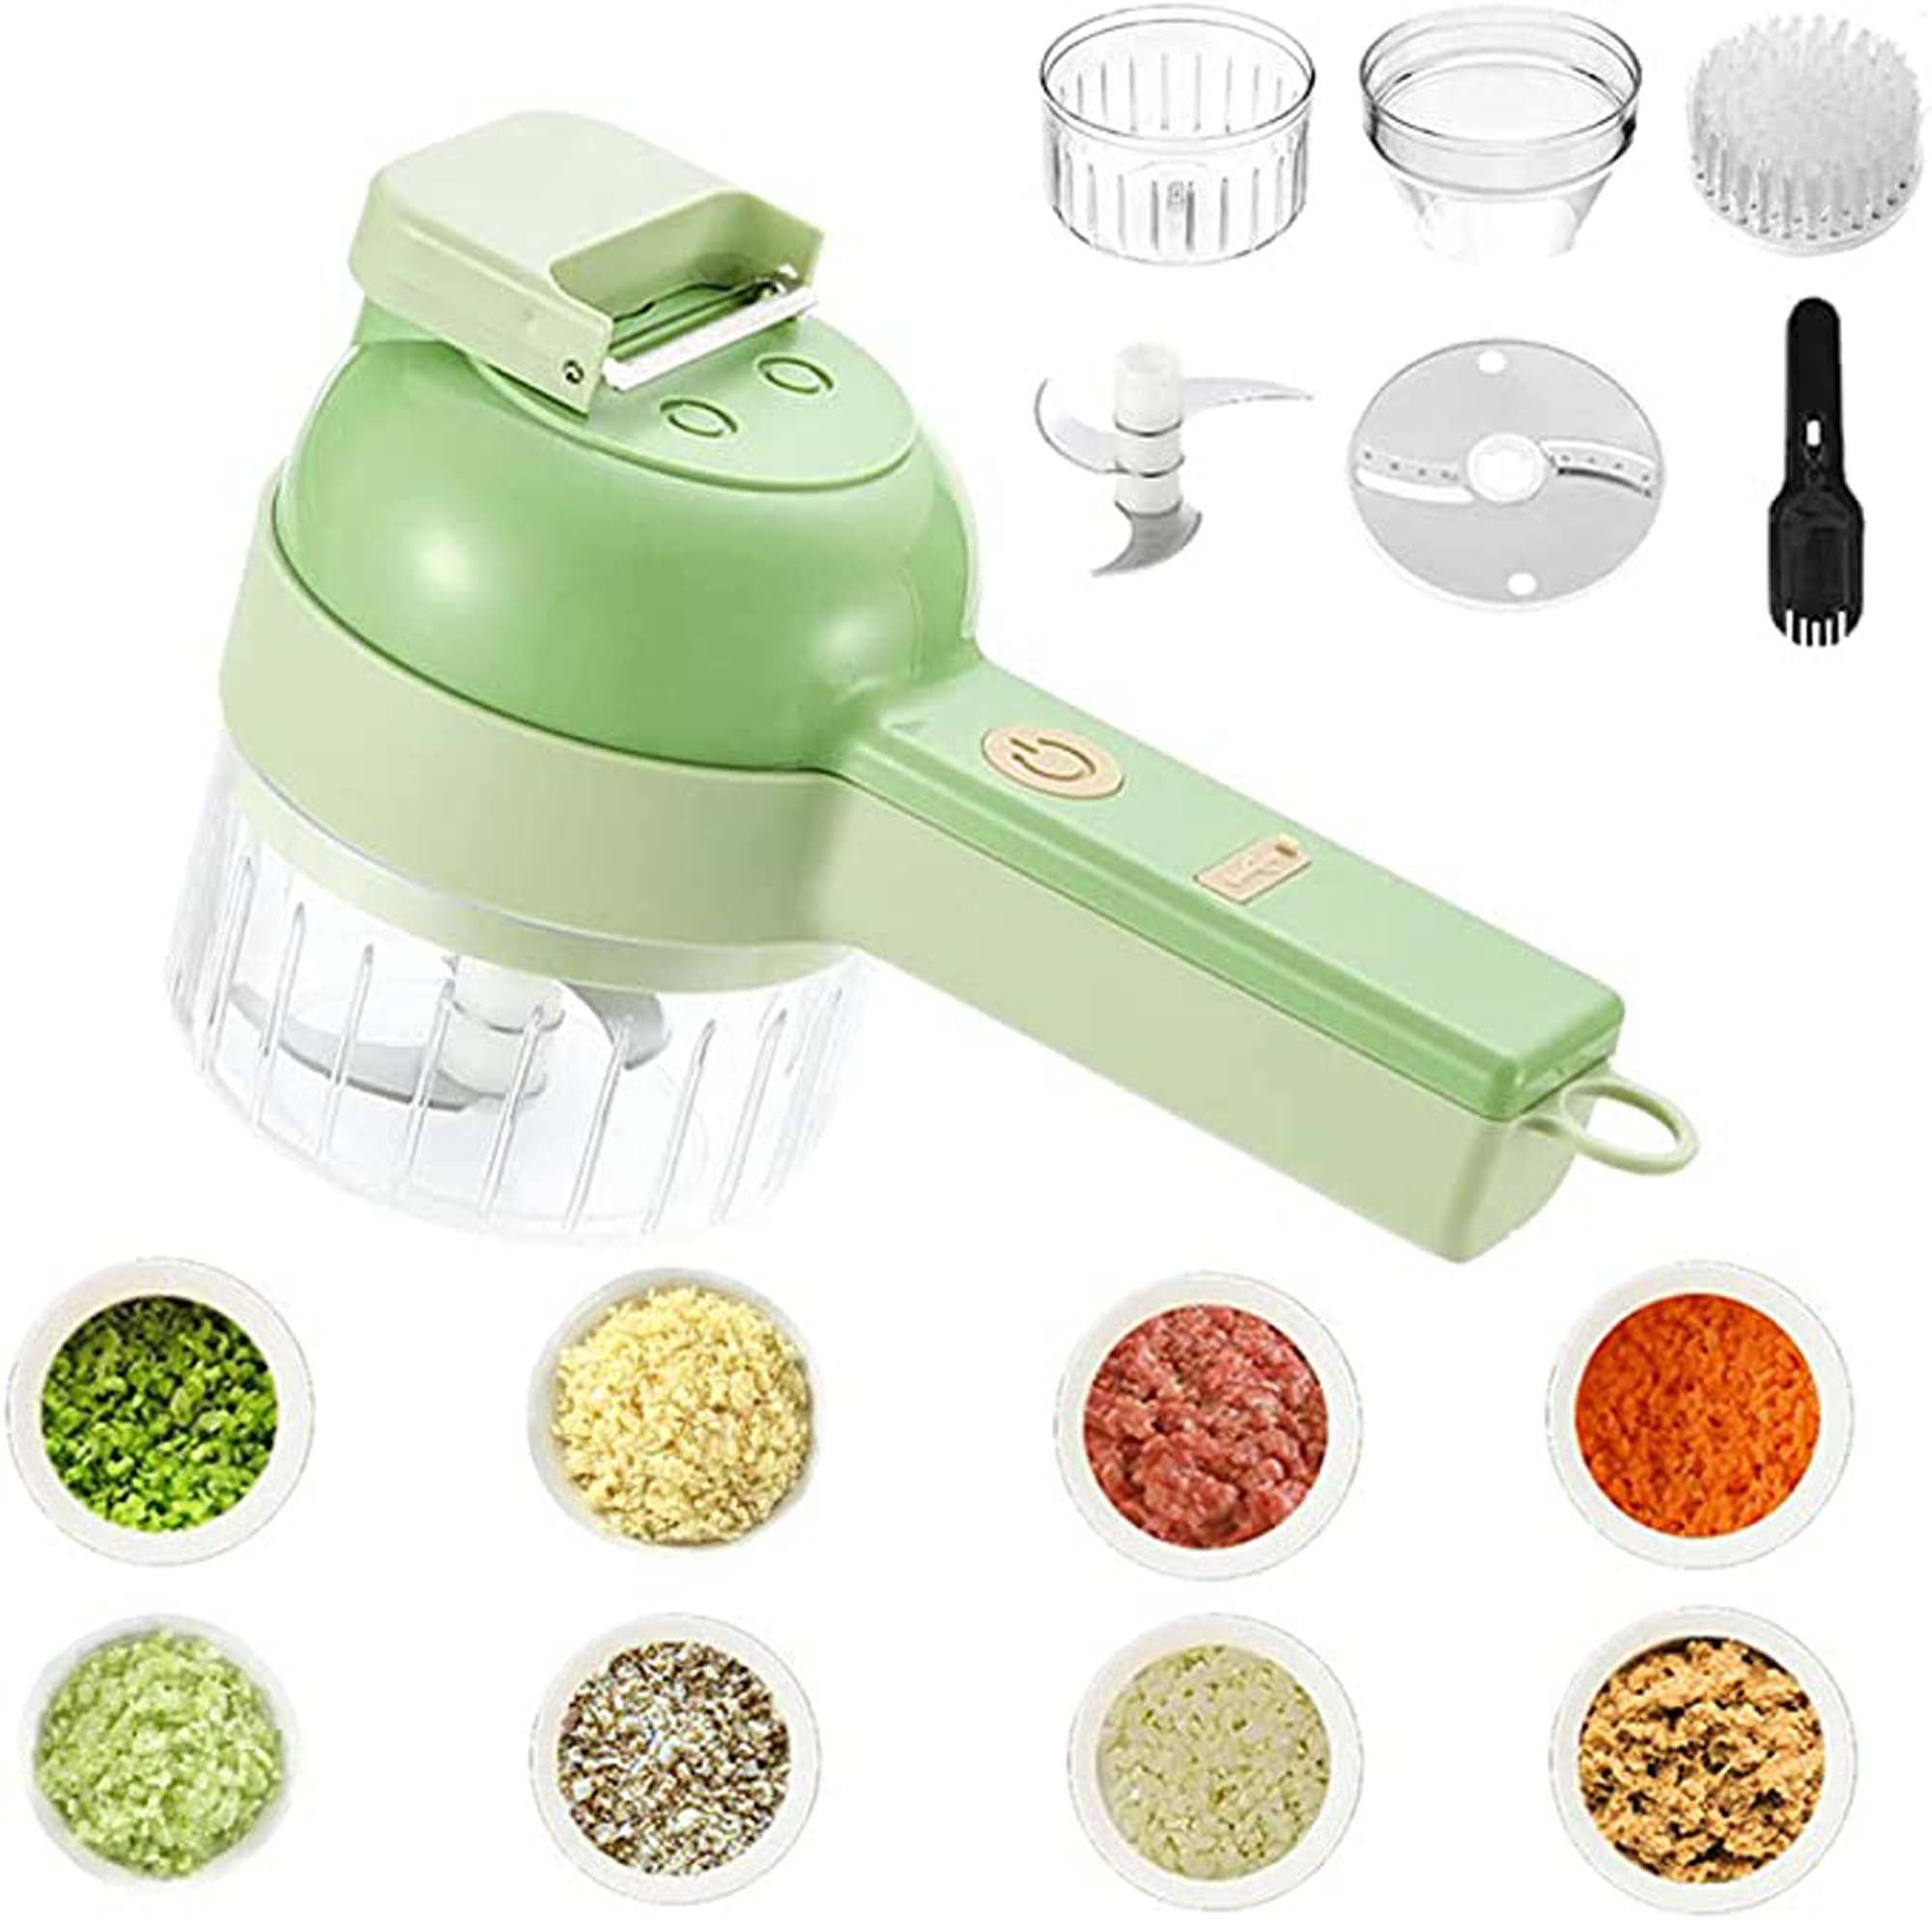 4 in 1 Portable Electric Vegetable Cutter Set, Multifunctional Wireless Food Processor, Kitchen Gadgets Electric Garlic Chopper with Brush, for